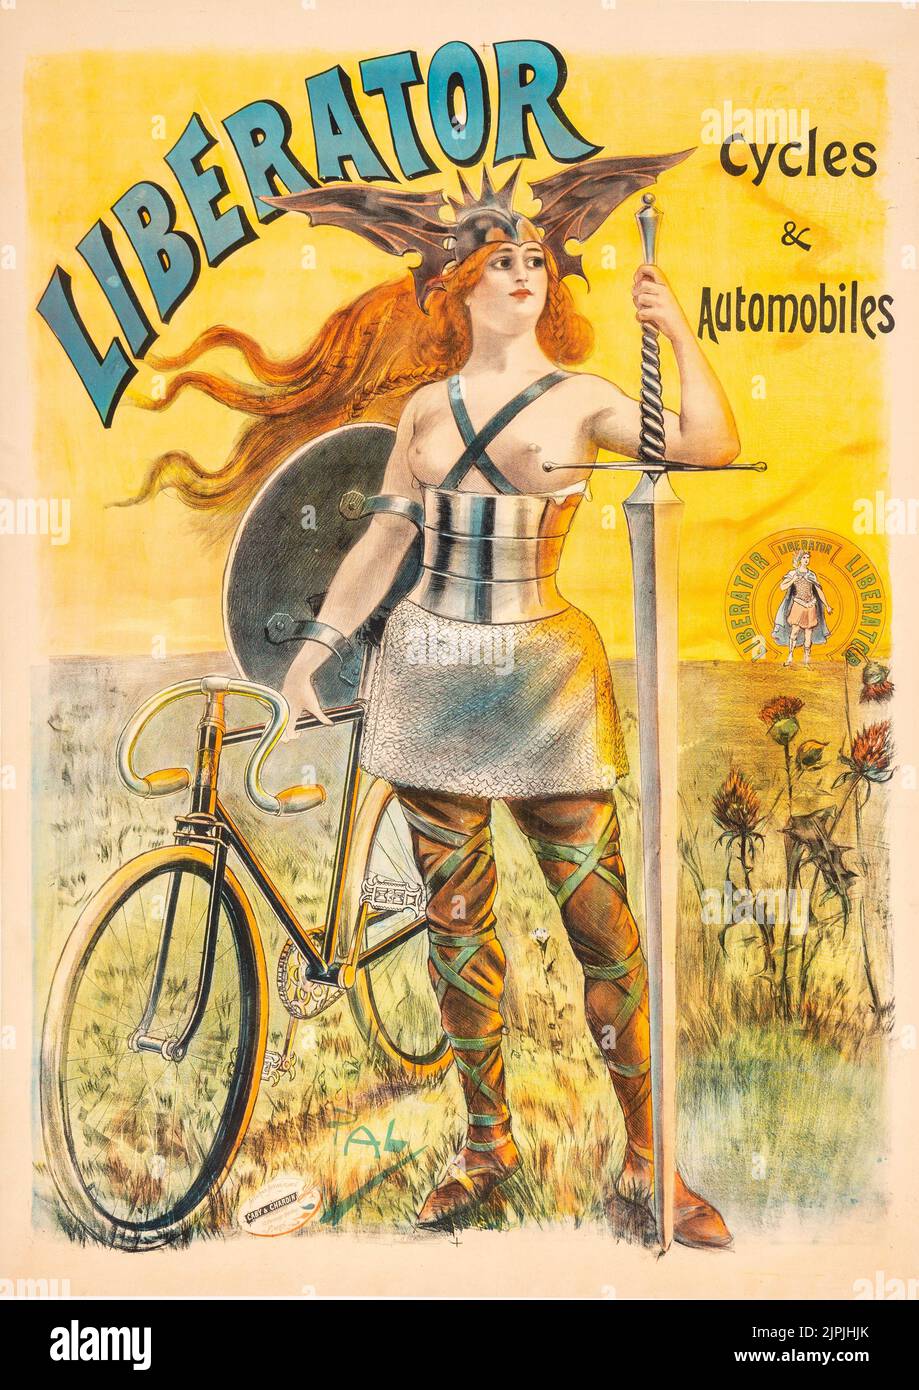 1896: Vintage French advertising bicycle poster. Liberator Cycles and Automobiles. PAL (Jean de Paleologue) (1860-1942) was born in Bucharest, Romania. After living in London, he moved to Paris in 1893 and was known for his posters of beautiful women. In 1900 he moved to the United States and worked in applied graphics including Vanity Fair. Later he developed ads and publicity for the automobile, film and animation industries. (Credit Image: © Vintage Posters/ZUMA Press Wire) Stock Photo